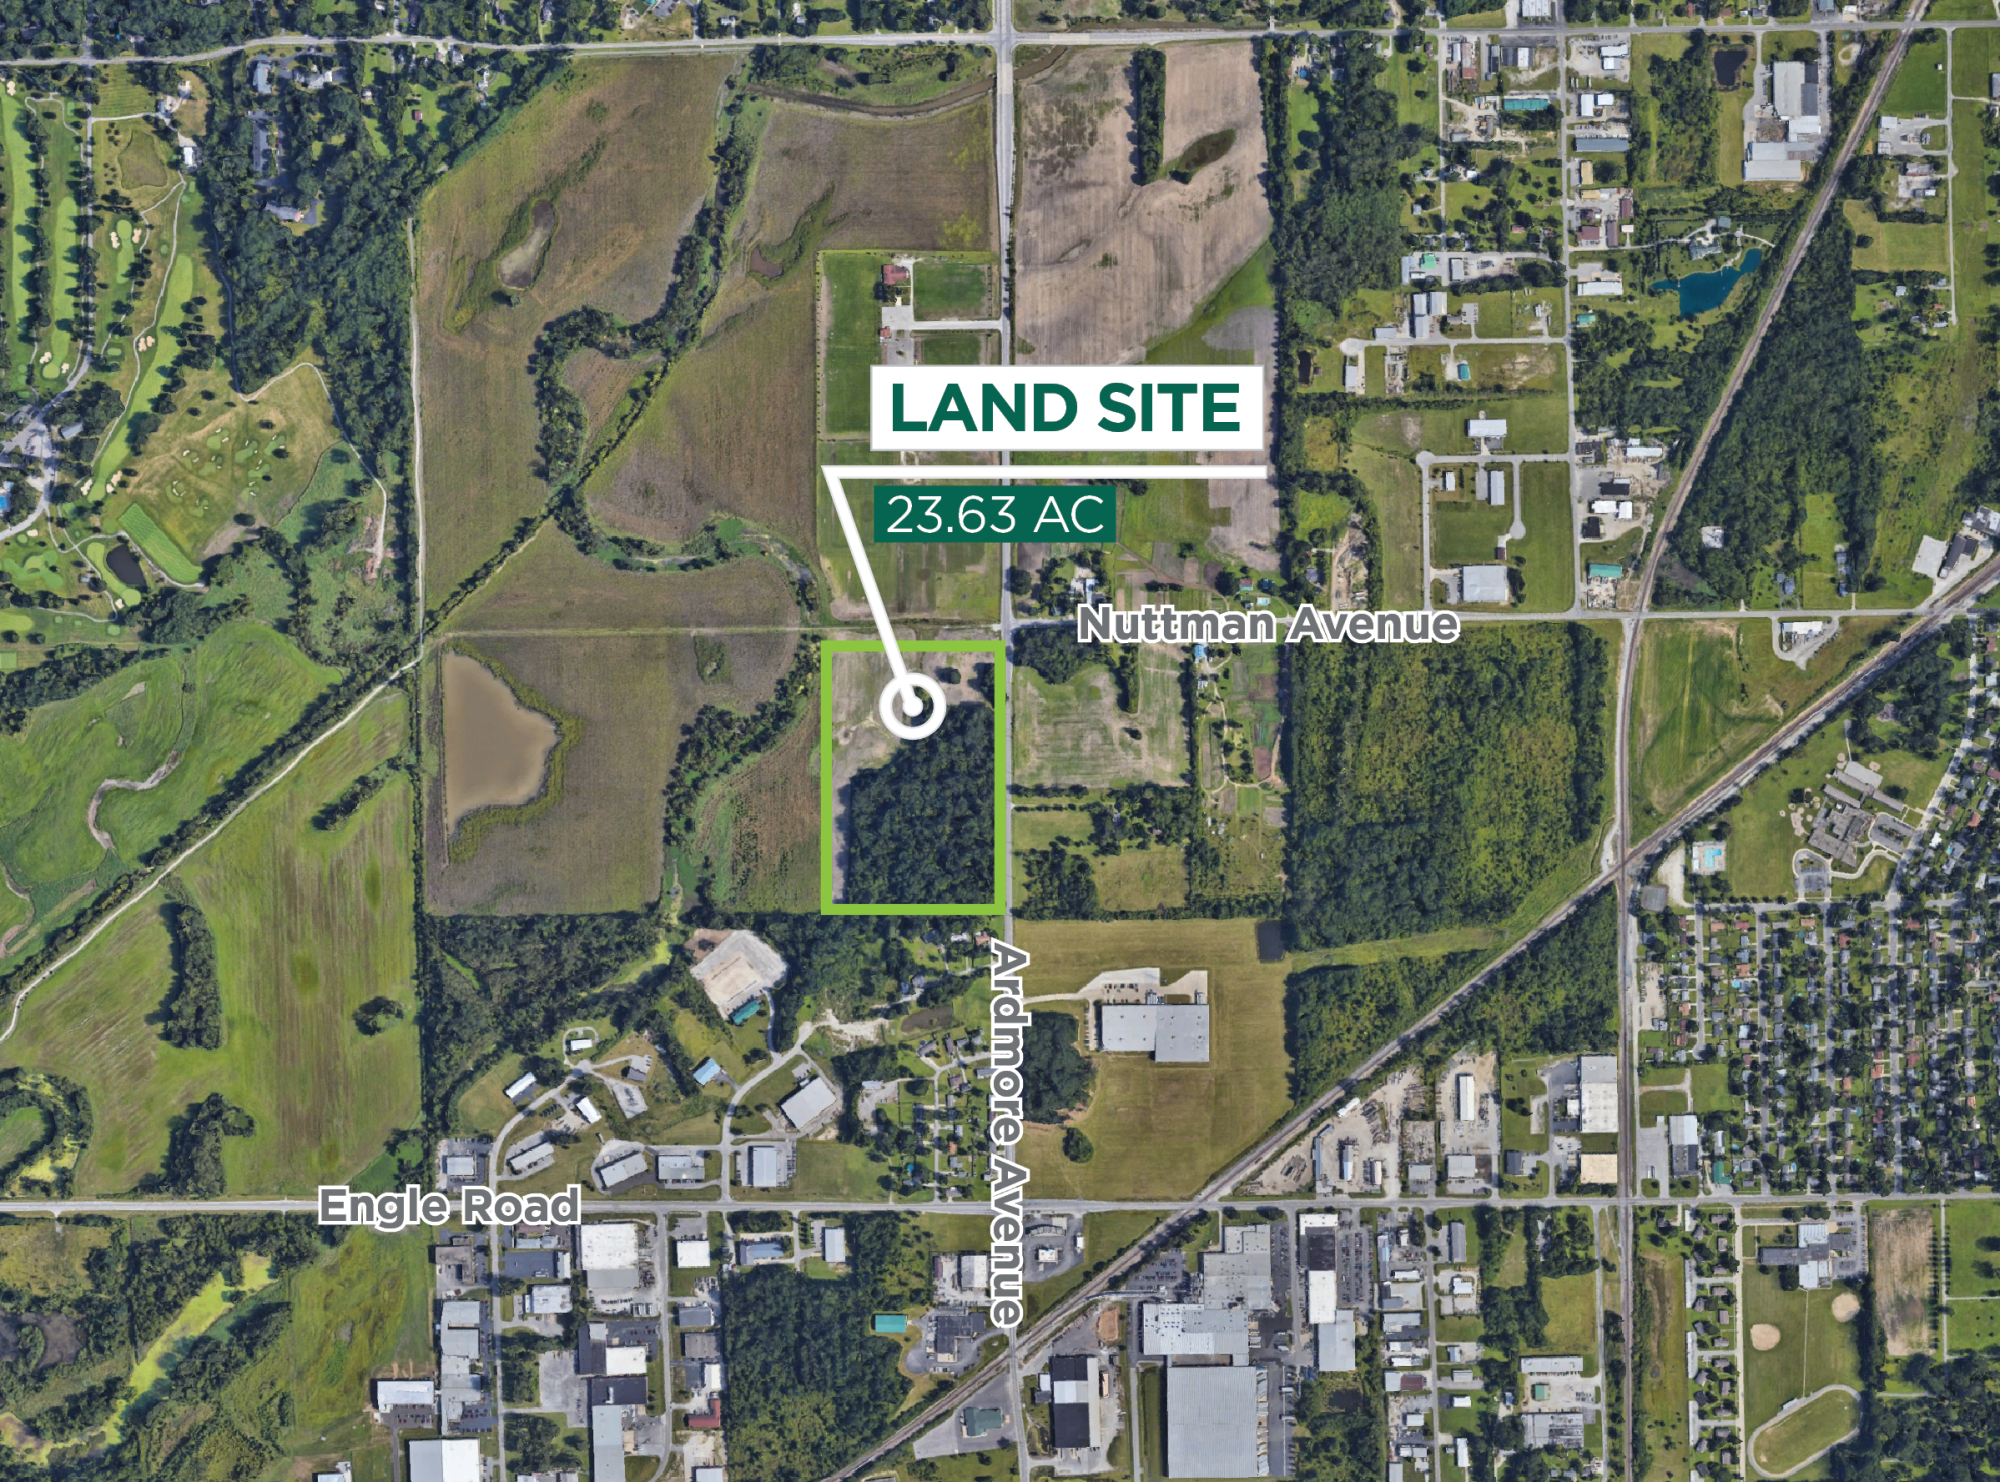 Sturges Property Group - Commercial Land For Sale Ardmore Avenue Fort Wayne Indiana